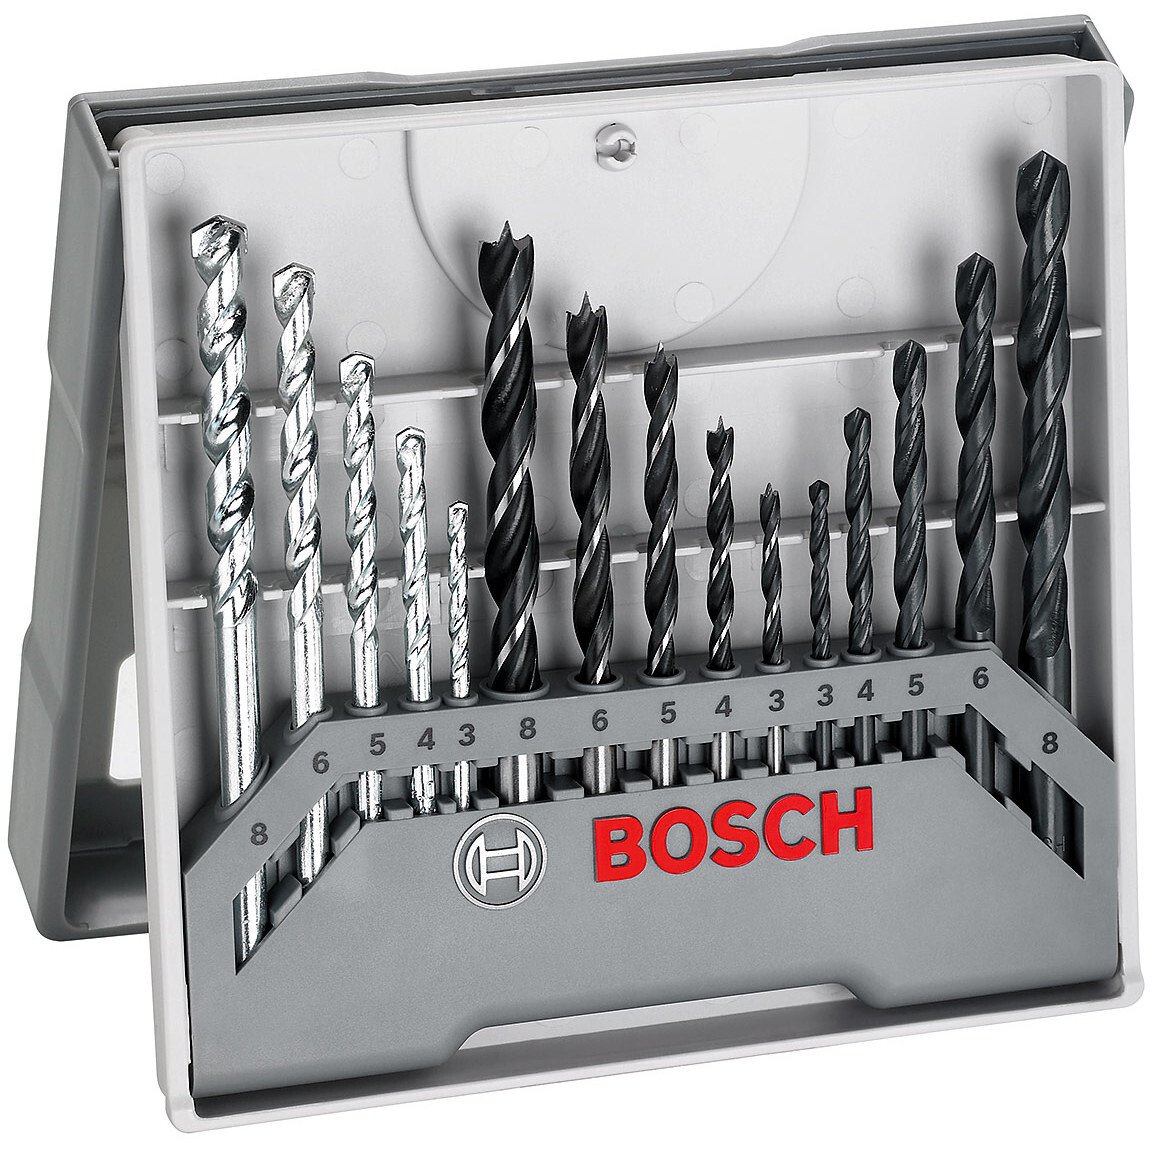 Bosch 2607017038 15 Piece Mixed Drill Bit Set for Wood, Metal and Masonry